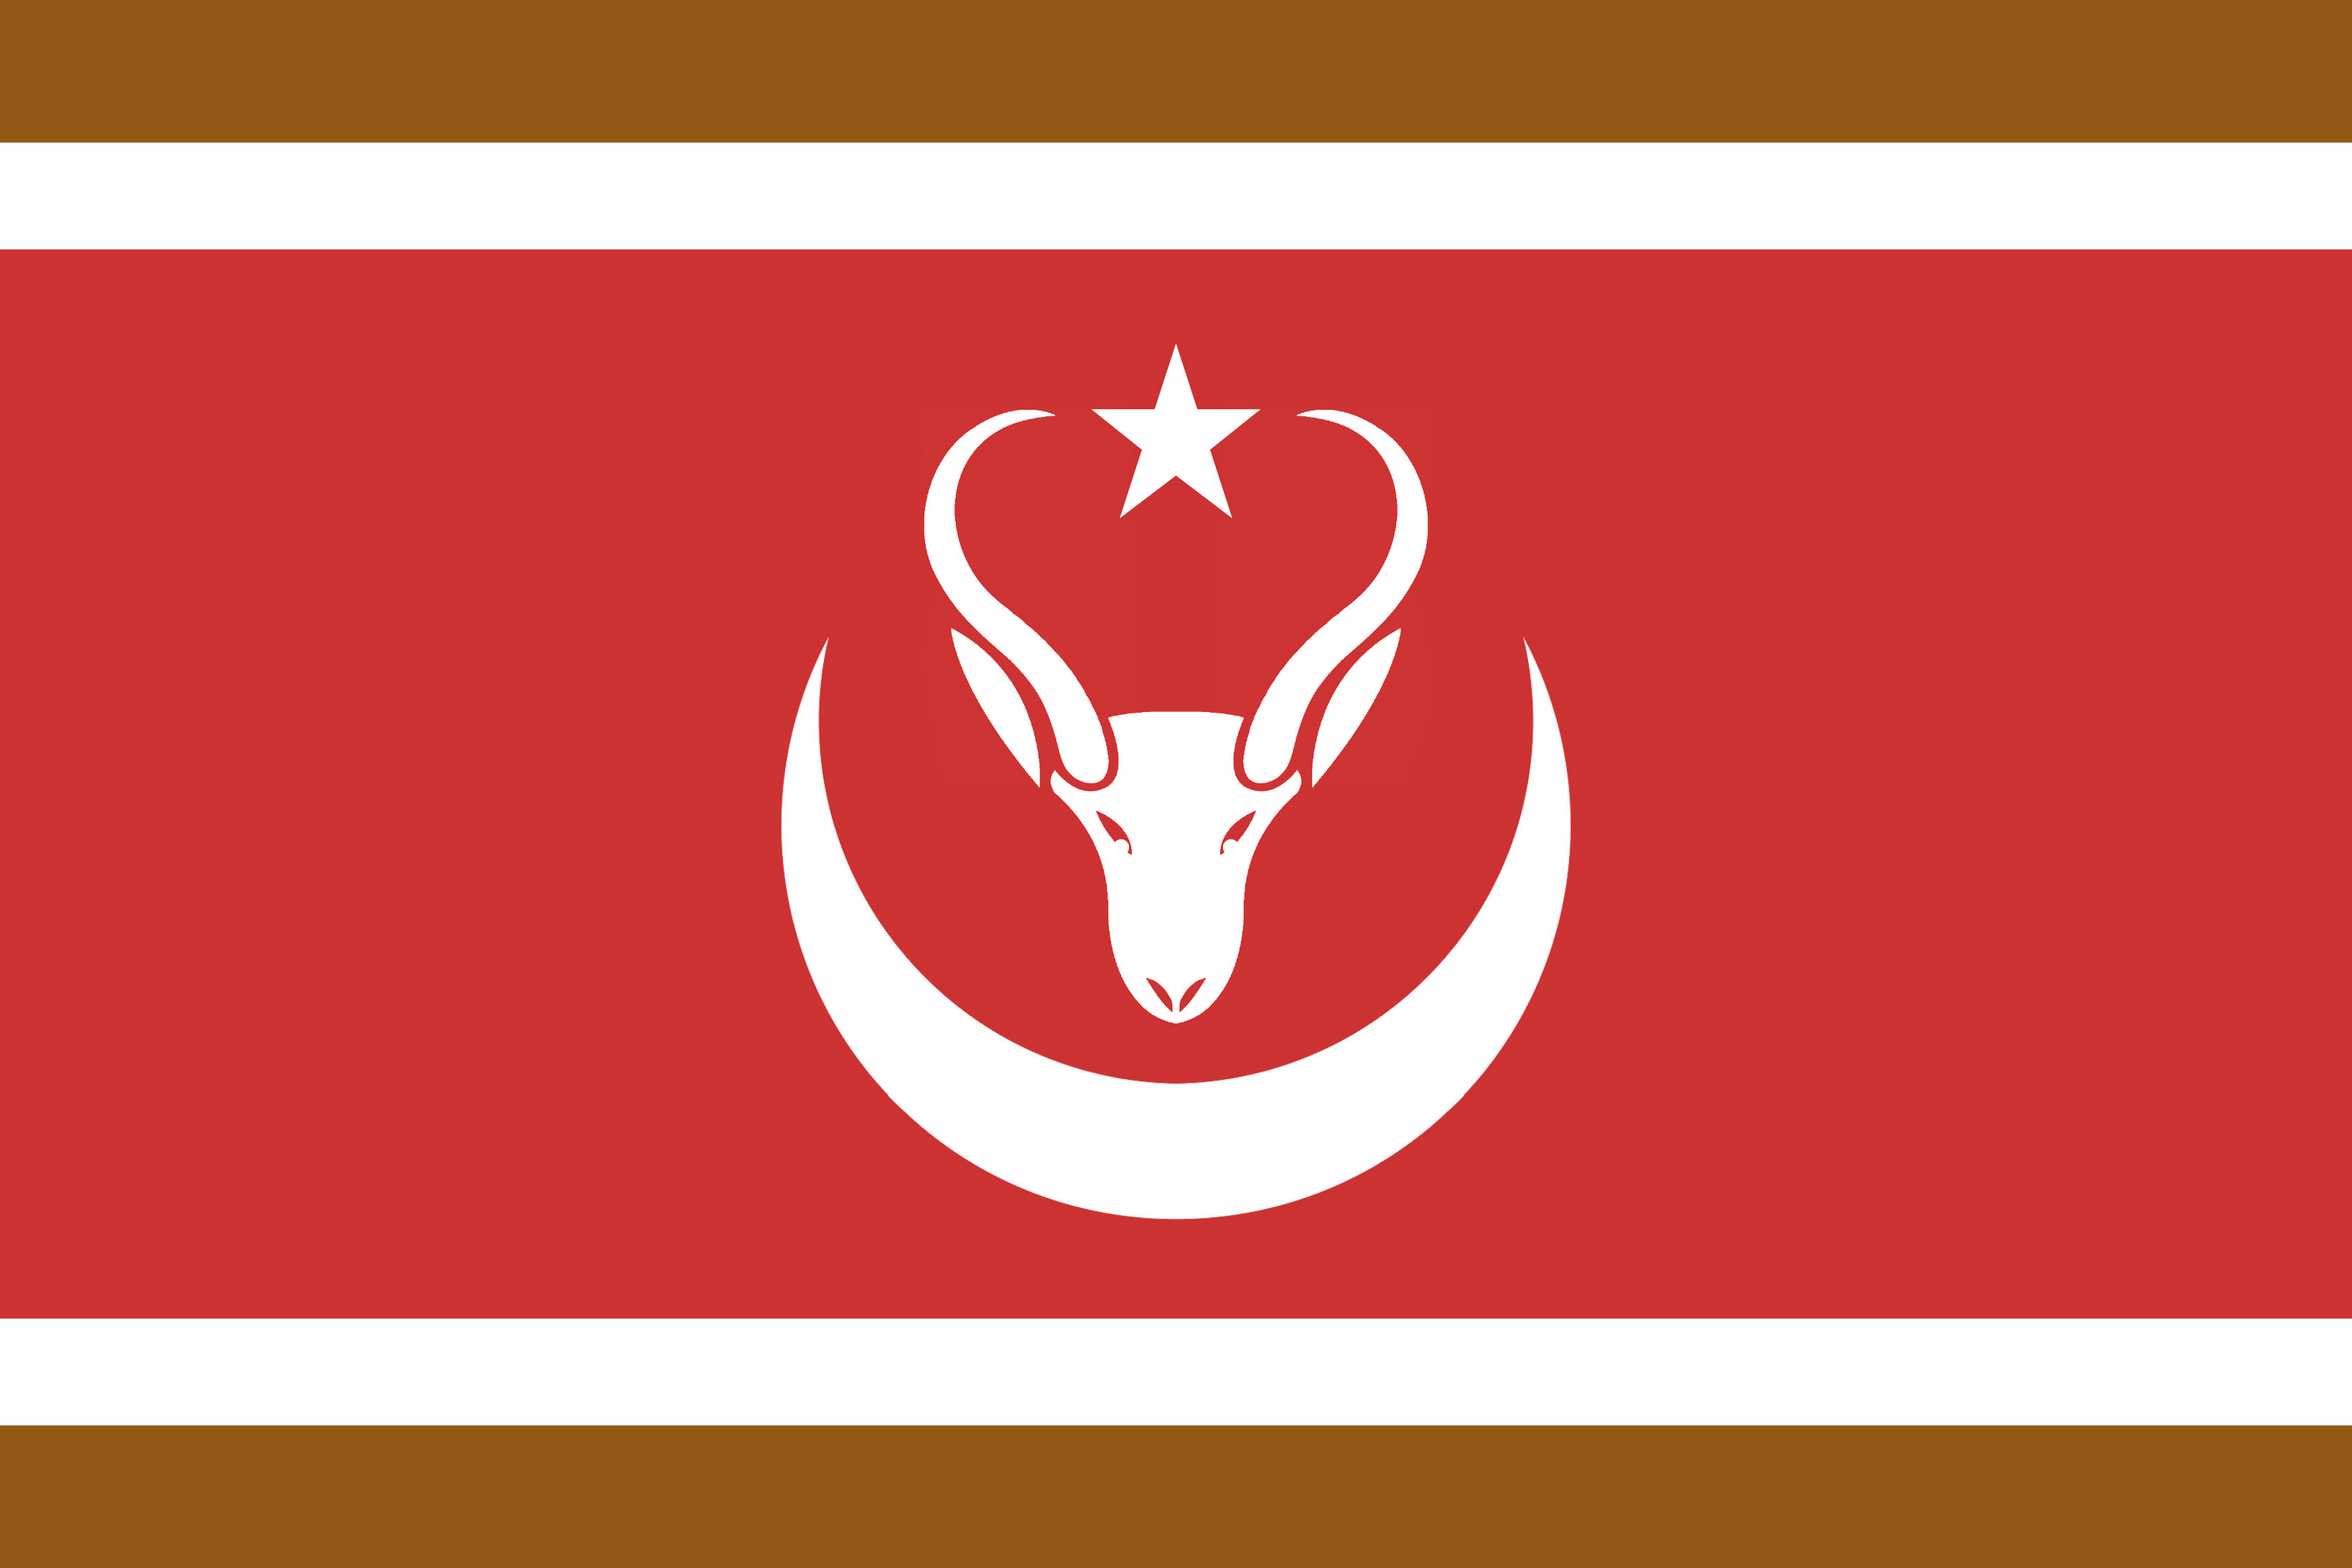 Russia if it had a cool flag and not a basic triband : r/vexillology